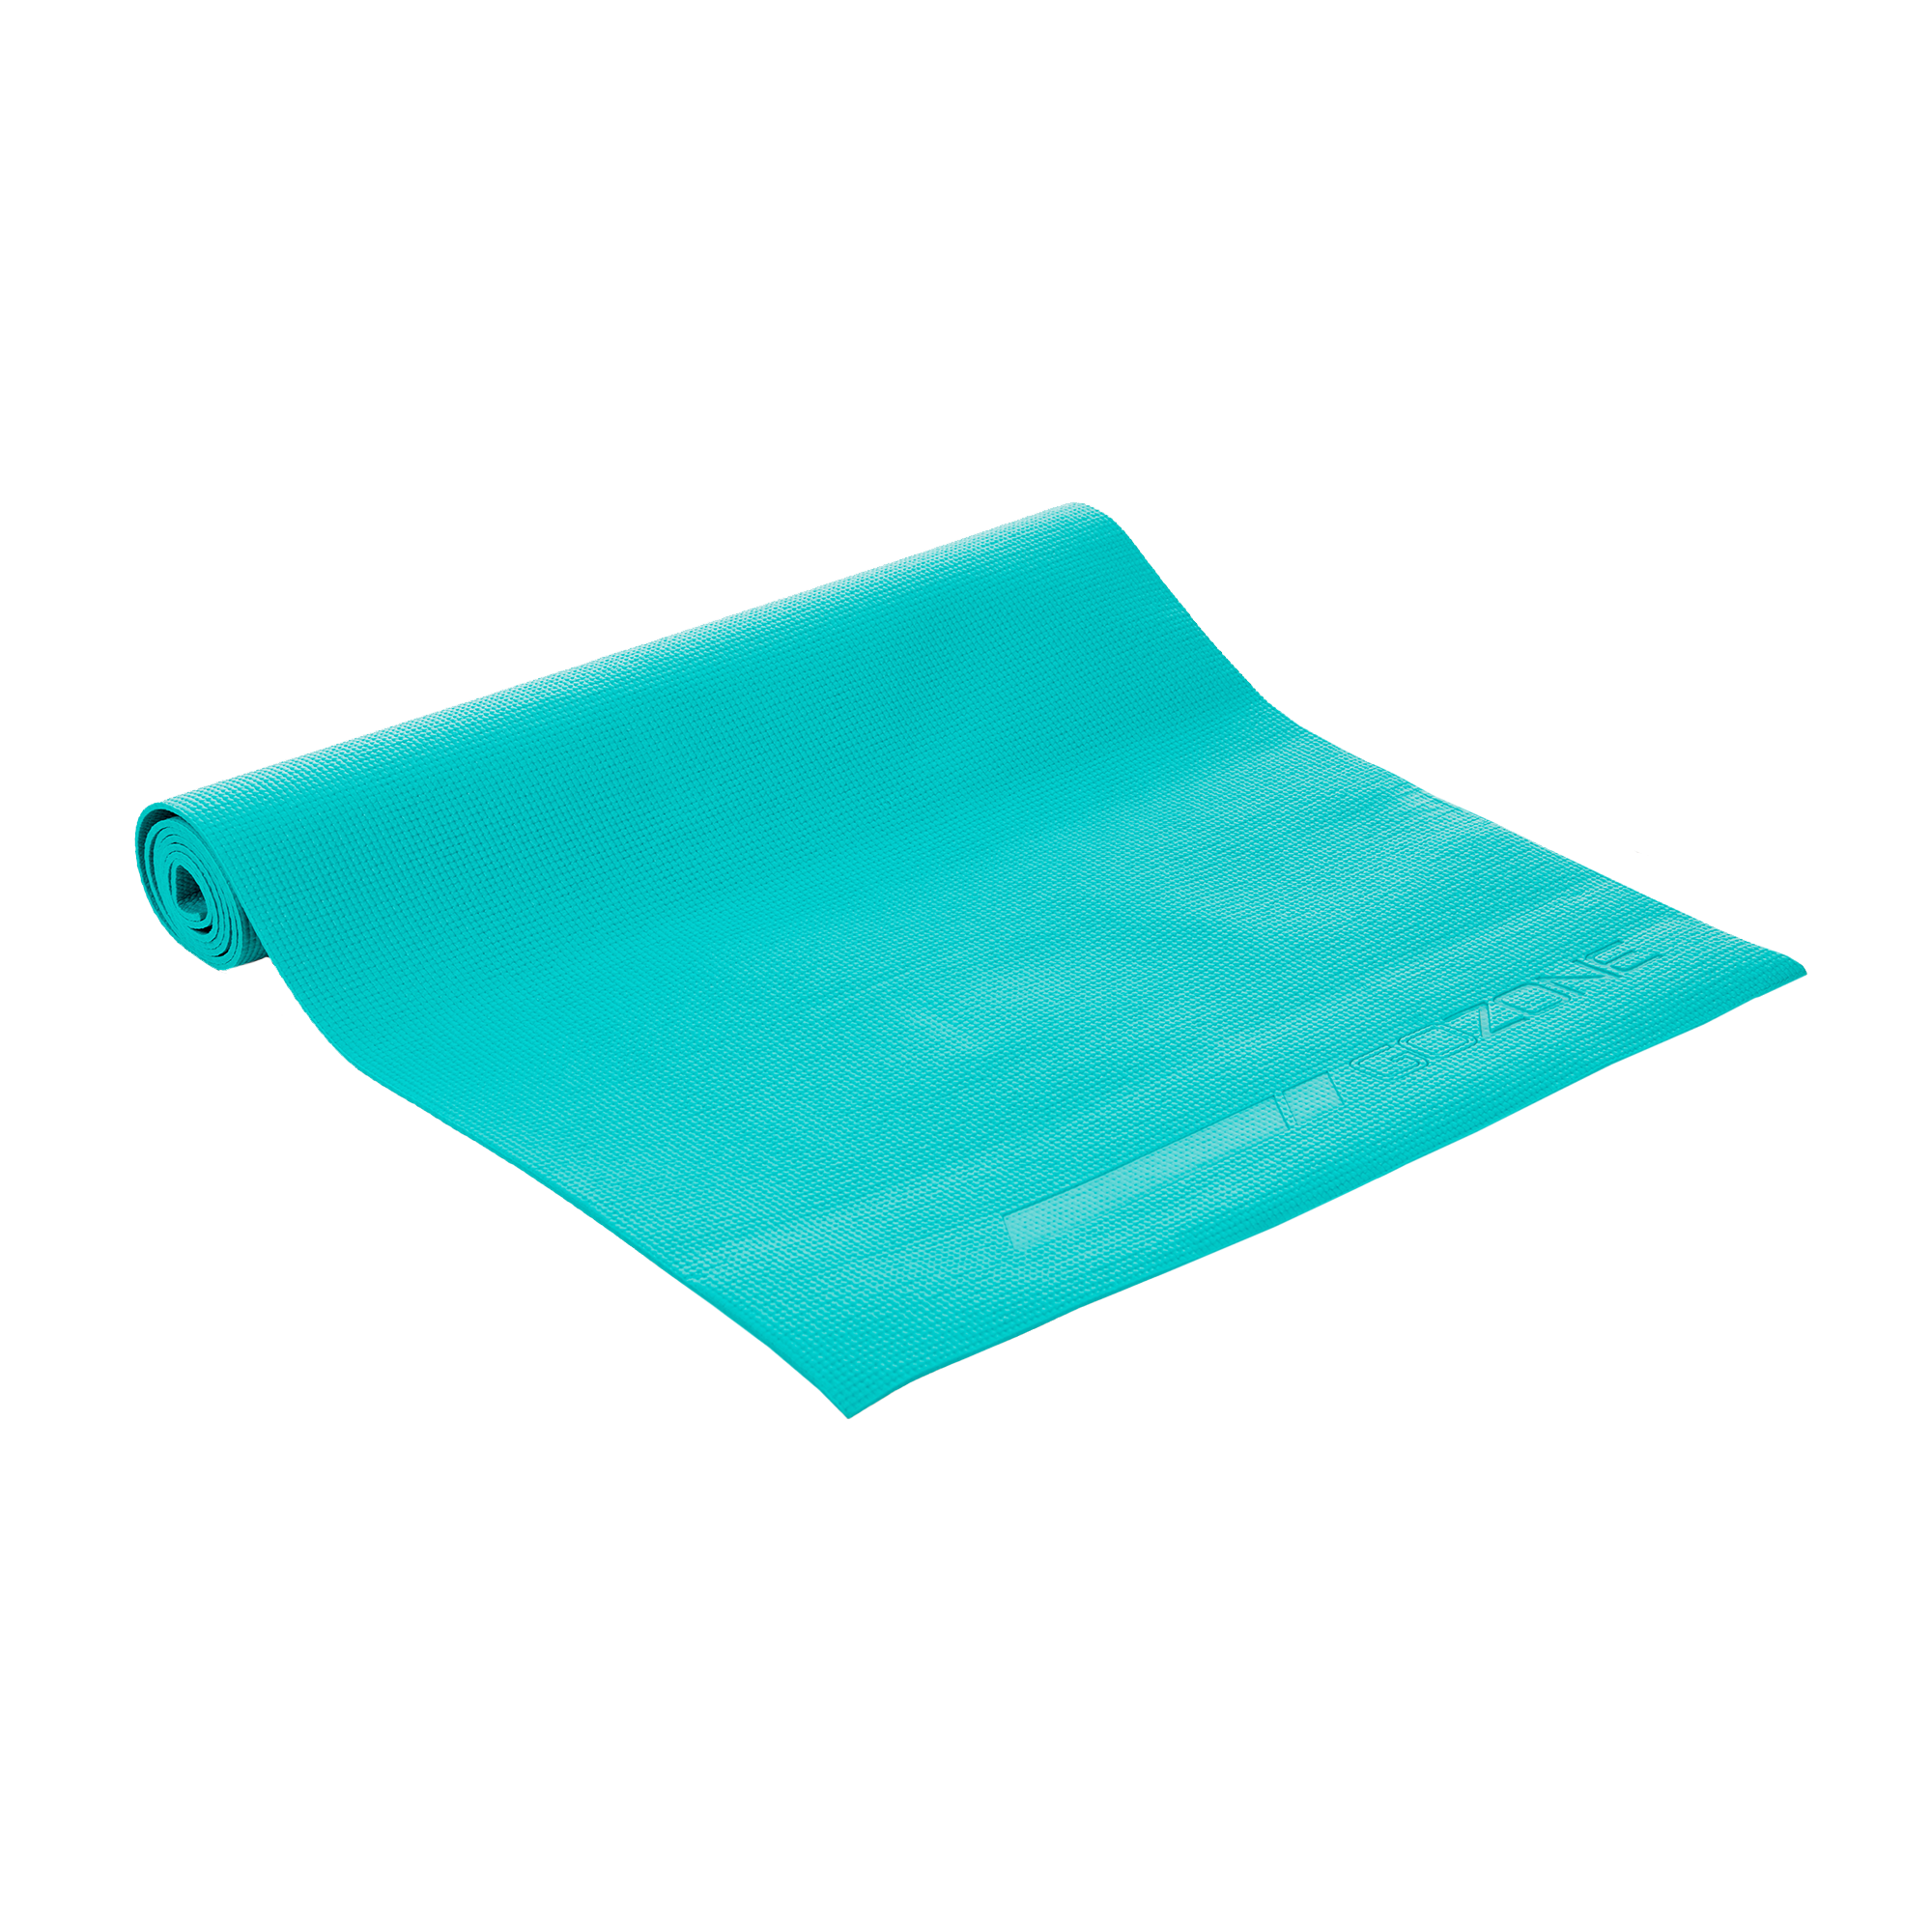 Athletic Works PVC Yoga Mat, 3mm, Real Teal, 68inx24in, Non Slip